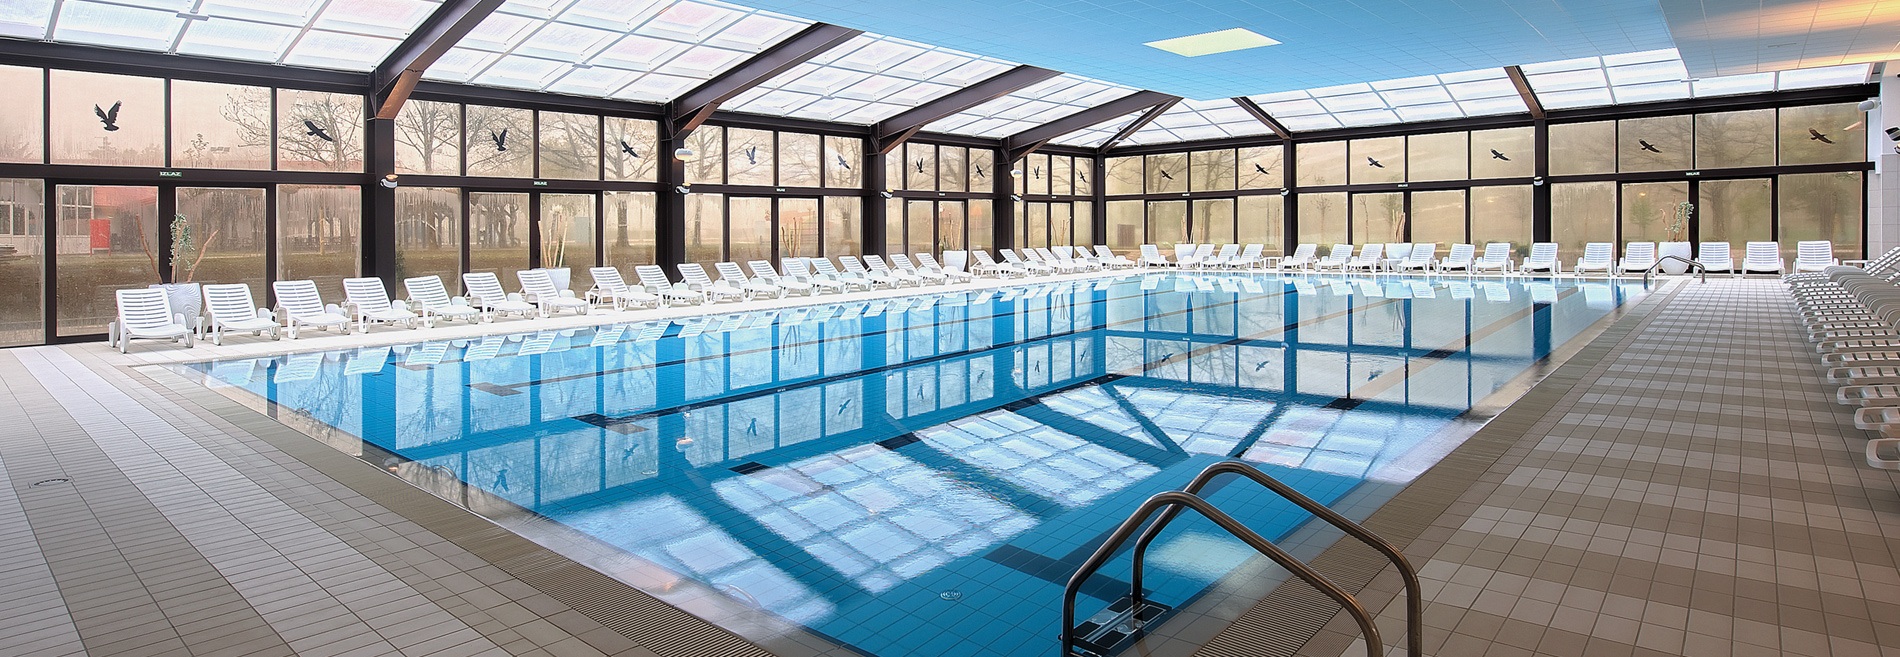 polycarobante panels being used for indoor pool